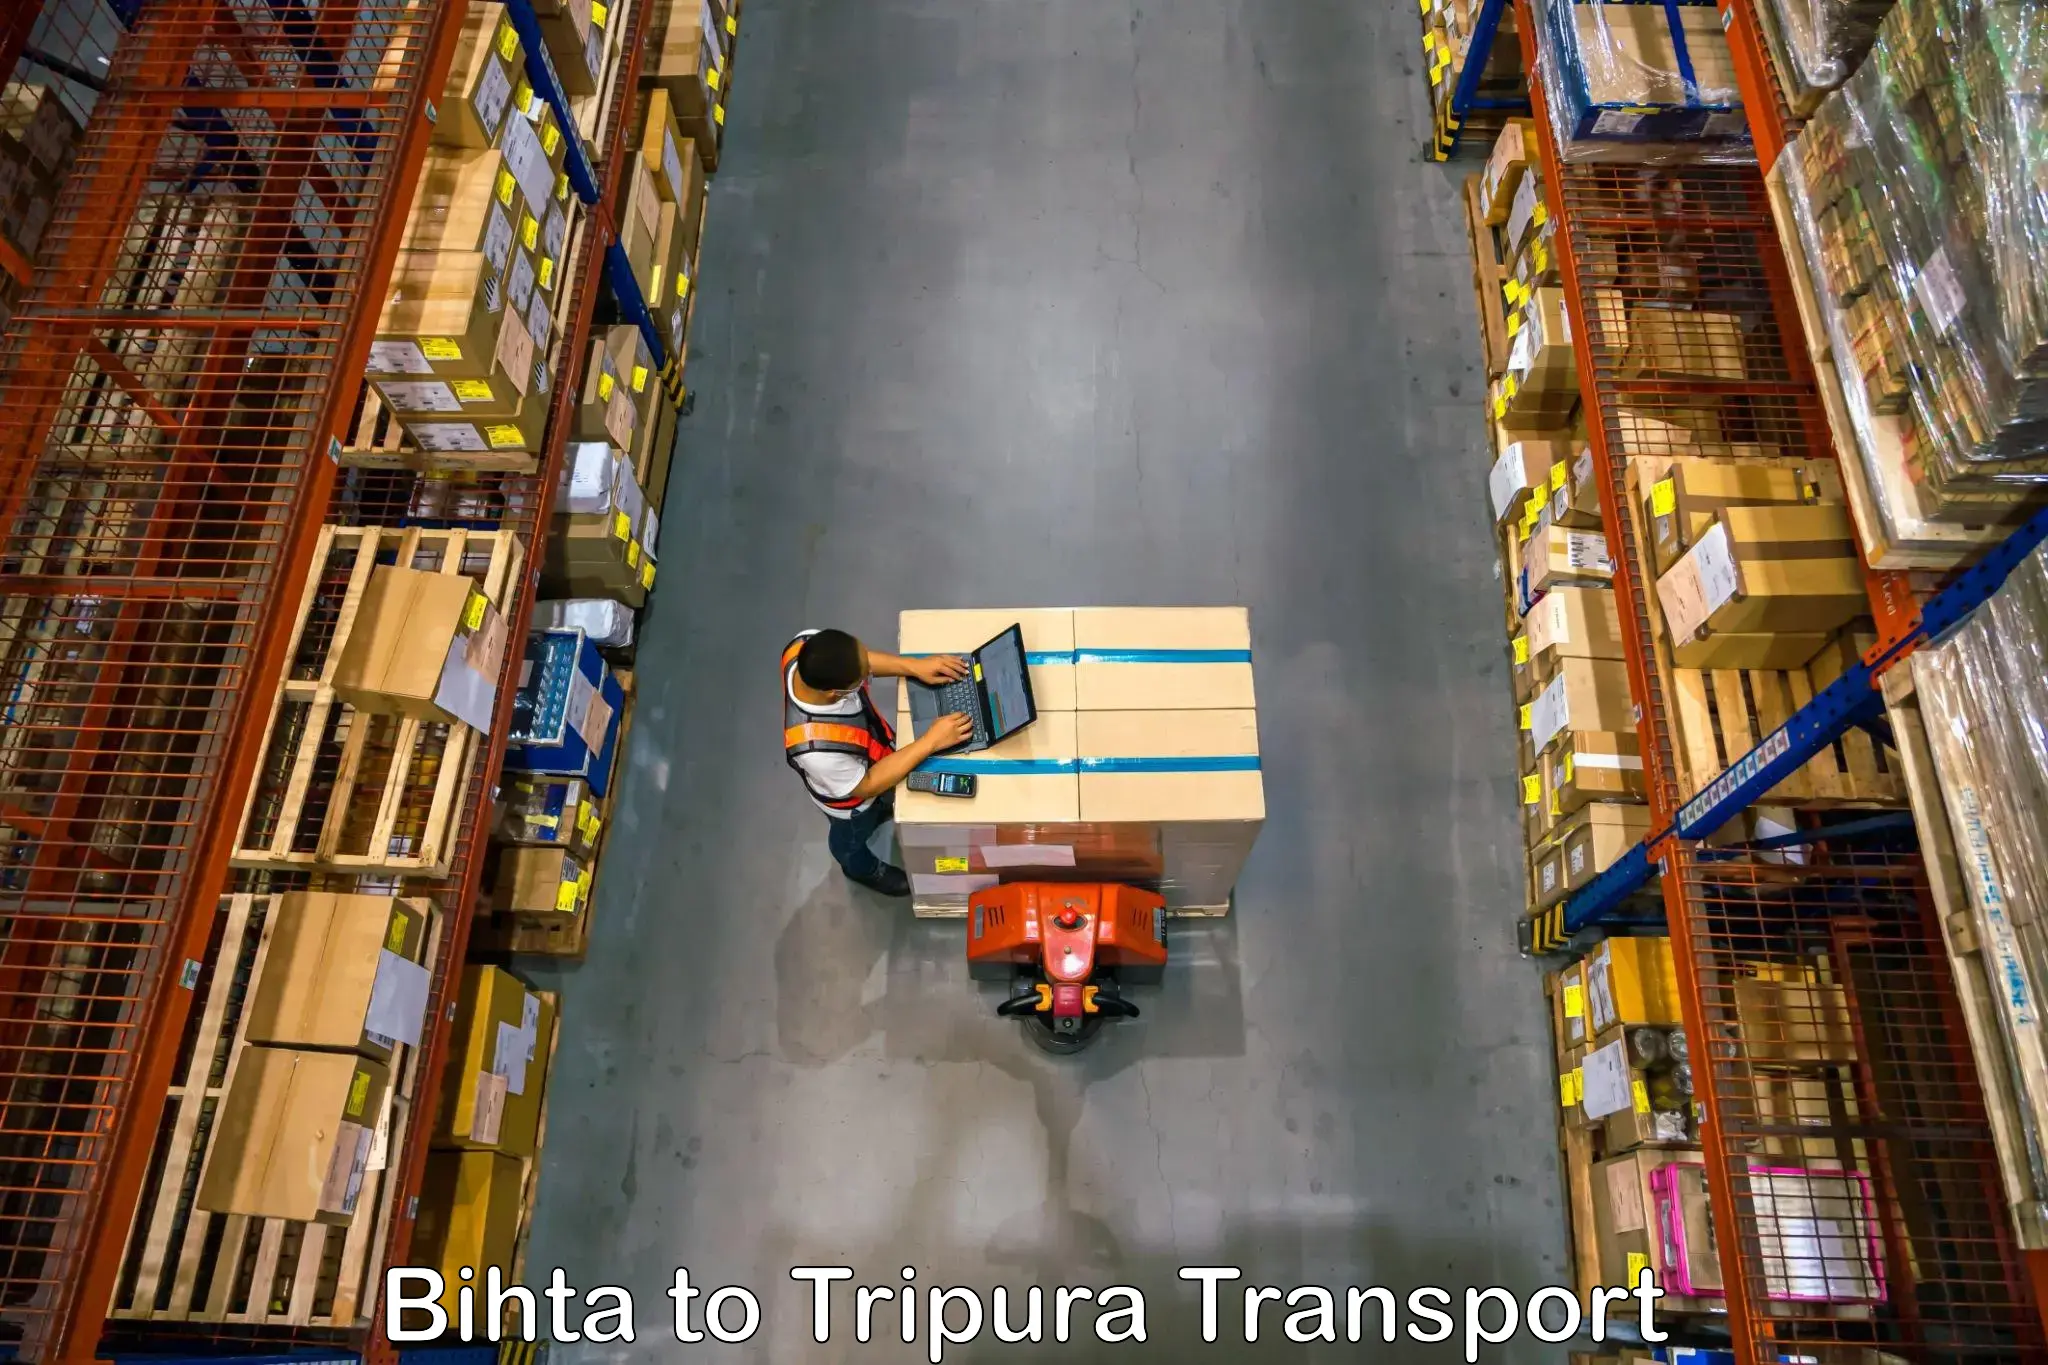 Transport bike from one state to another Bihta to West Tripura